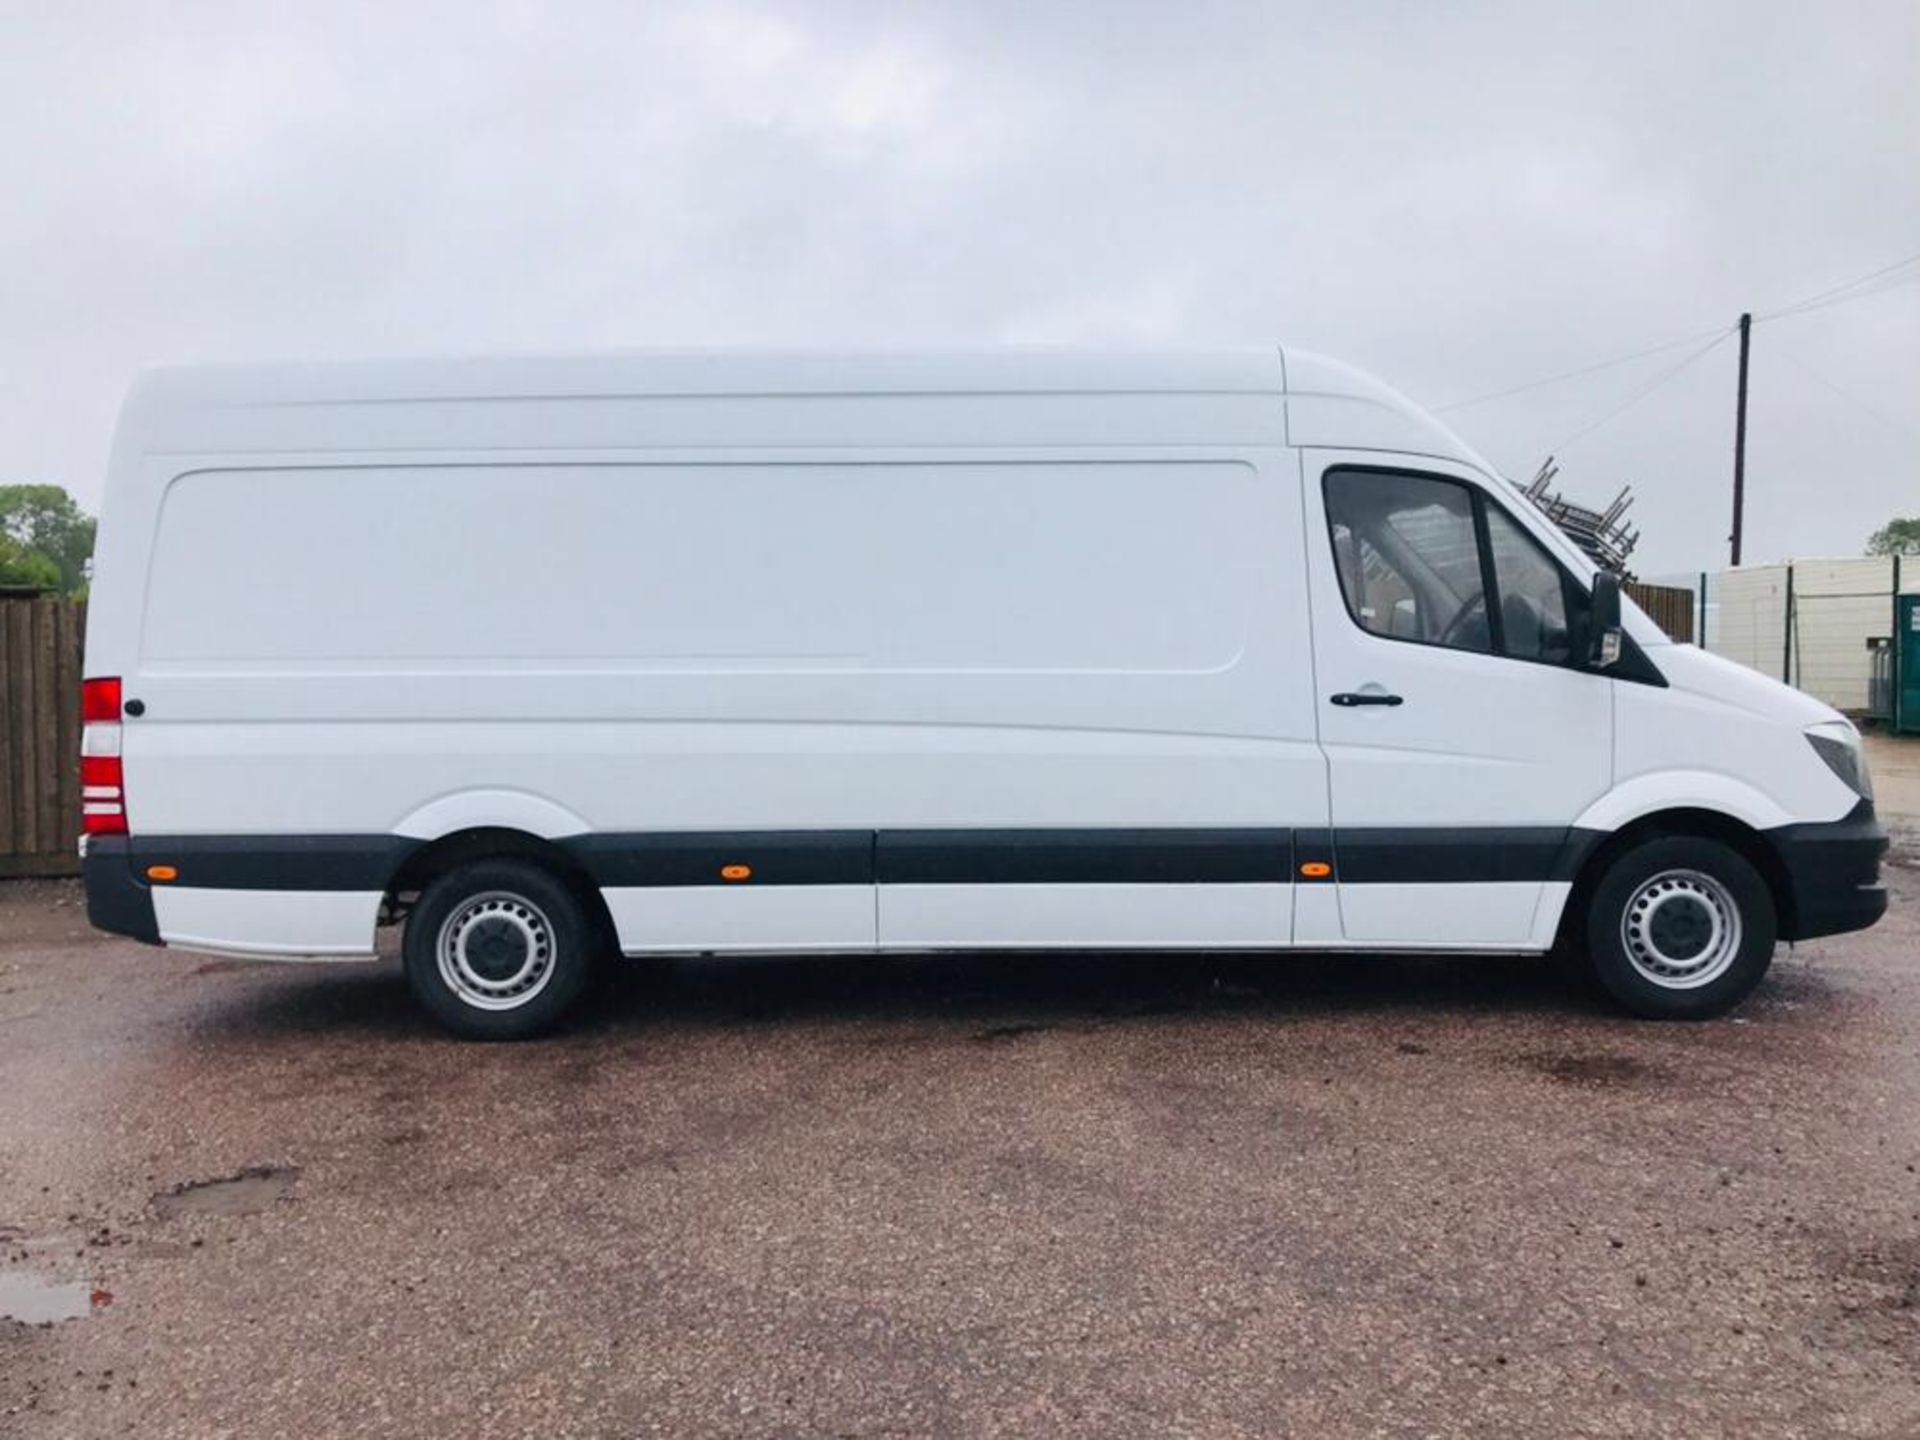 (ON SALE) MERCEDES SPRINTER 314CDI "140BHP" LWB (2018 MODEL) EURO 6 - LONDON COMPLIANT-DONT MISS OUT - Image 10 of 19